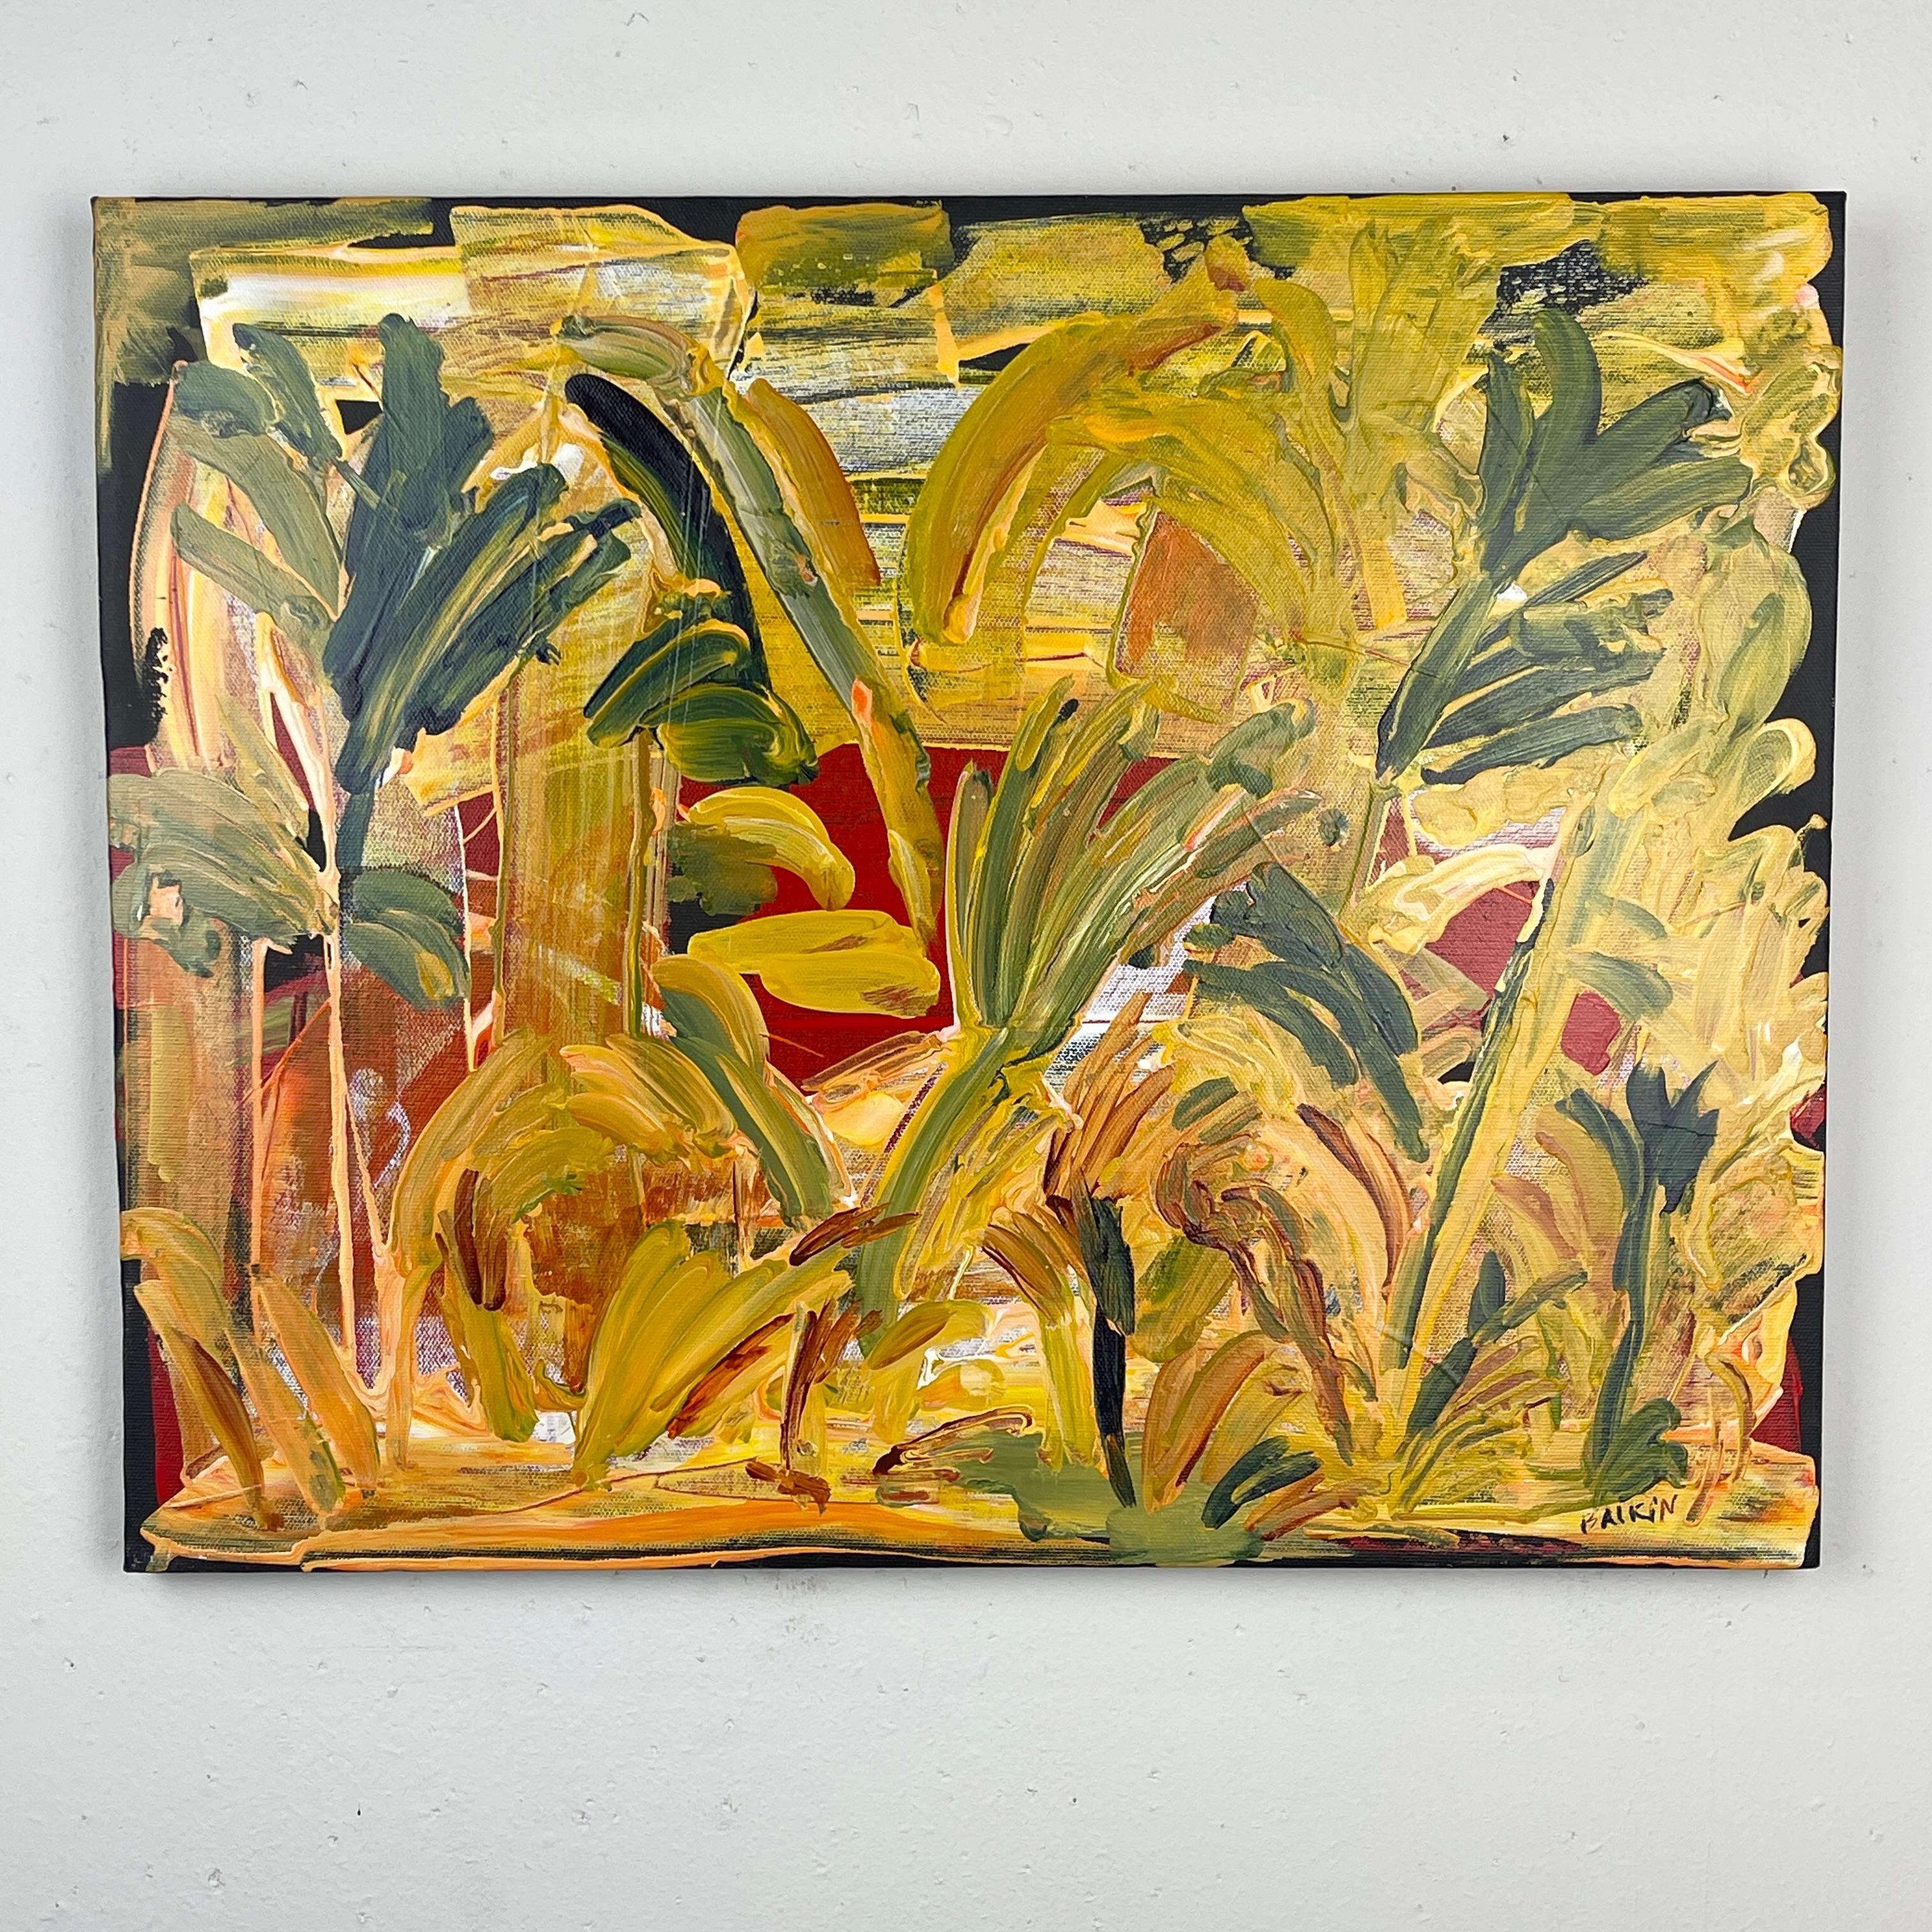 Steve Balkin (1938-2023)
This painting was purchased from Balkin's estate. It came from his home in upstate NY. It is titled "Venus de Floride", dated 8/2007 and signed both on the front and en verso. This painting appears to depict the palms of